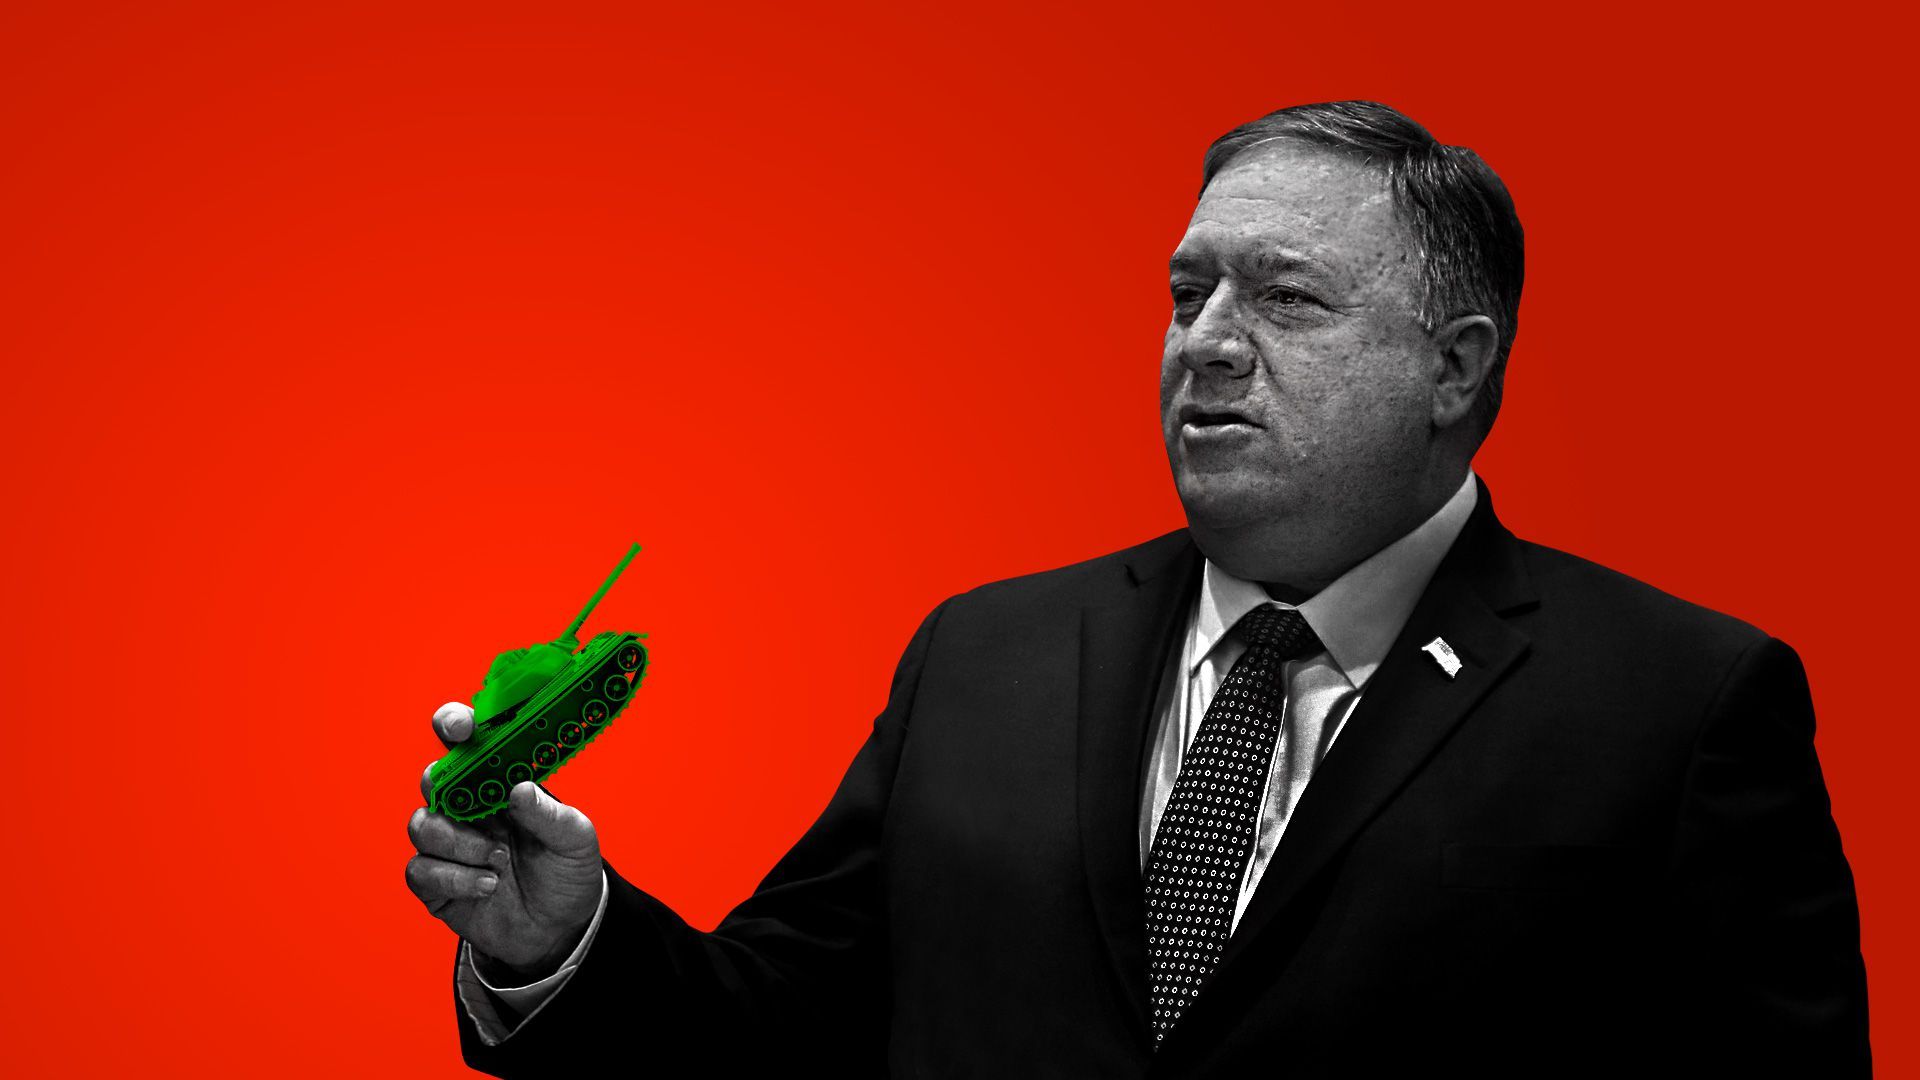 Illustration of Mike pompeo holding a tank